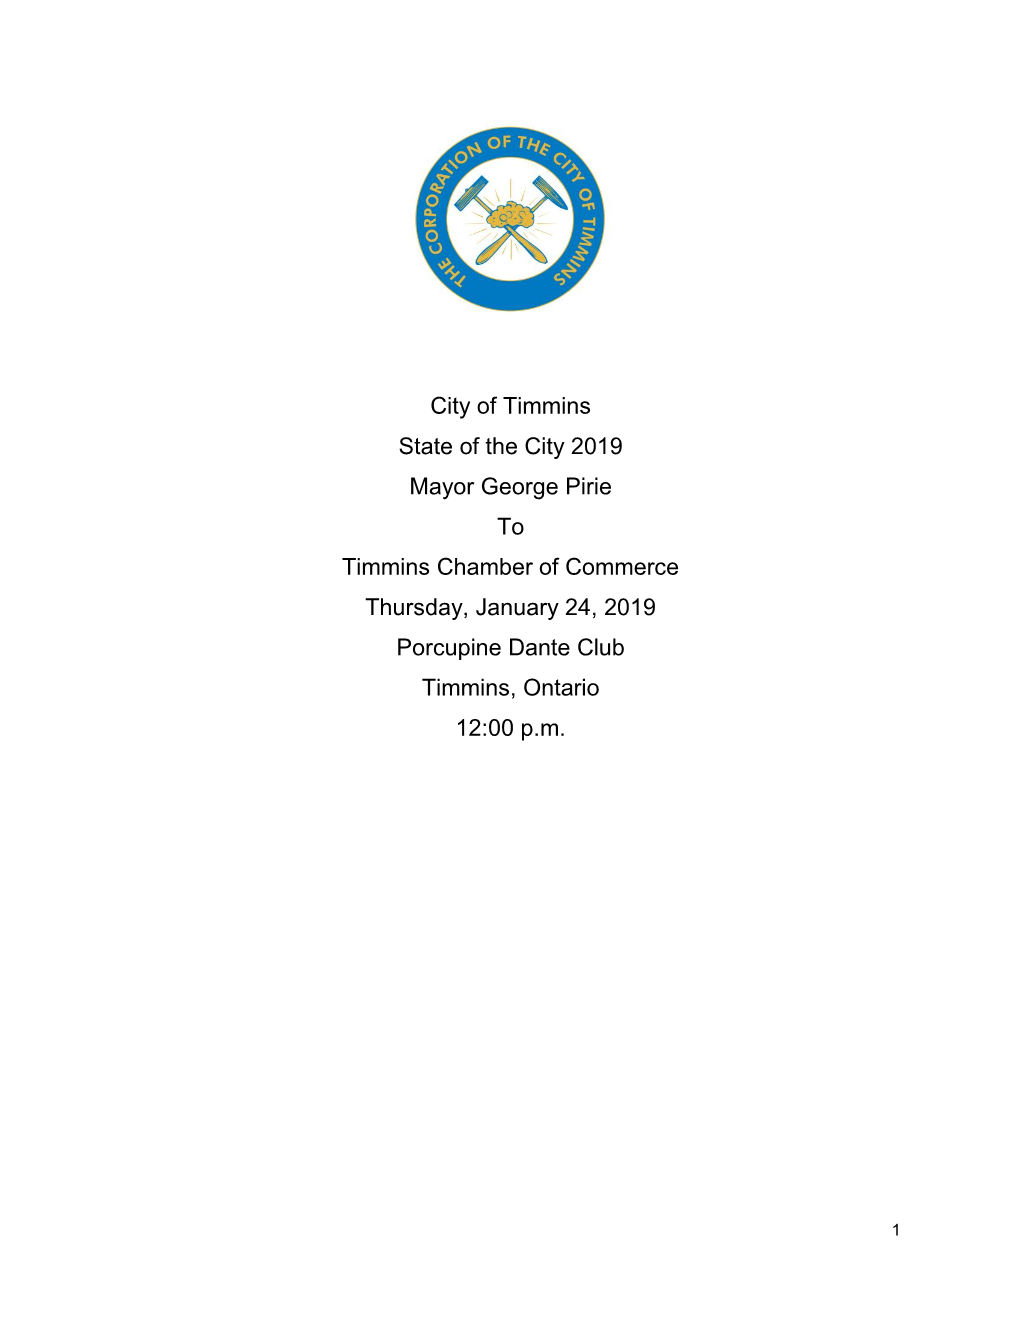 City of Timmins State of the City 2019 Mayor George Pirie to Timmins Chamber of Commerce Thursday, January 24, 2019 Porcupine Dante Club Timmins, Ontario 12:00 P.M